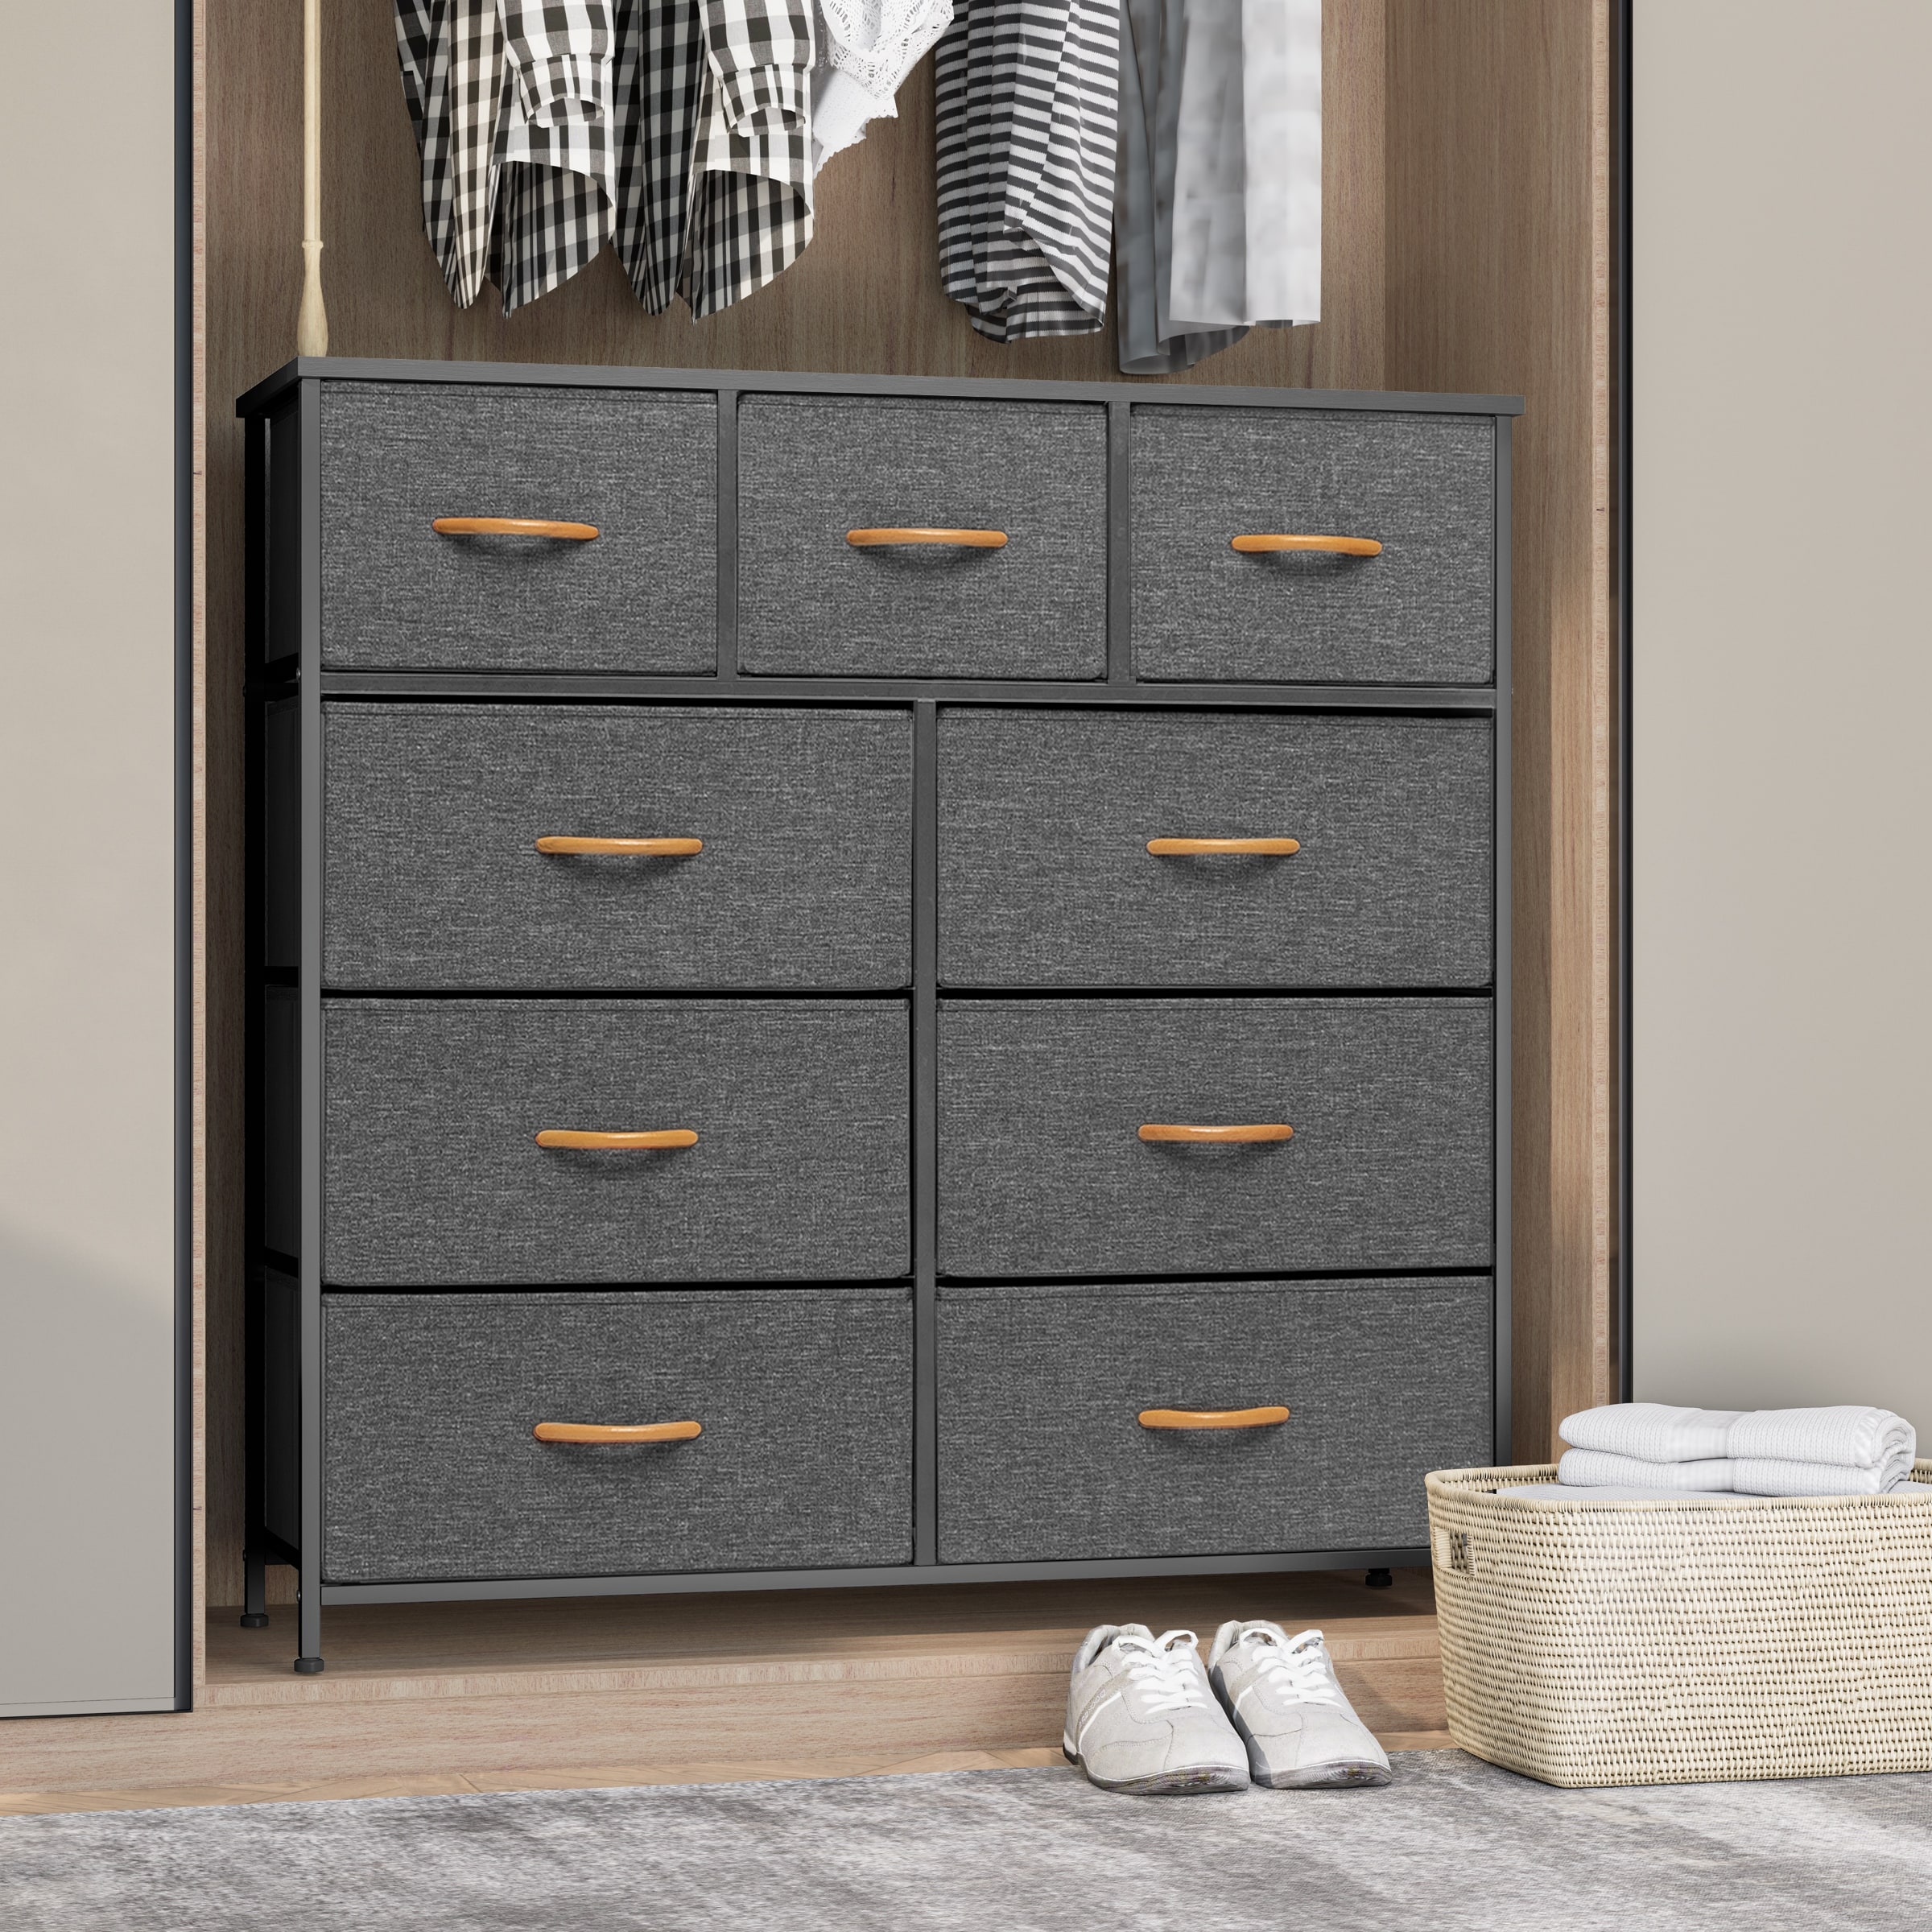 https://ak1.ostkcdn.com/images/products/is/images/direct/311f3a98a9c7c4abd81a896cb5ac0ad73d54bf52/VredHom-Extra-Wide-9-Drawers-Fabric-Dresser-Storage-Organizer.jpg